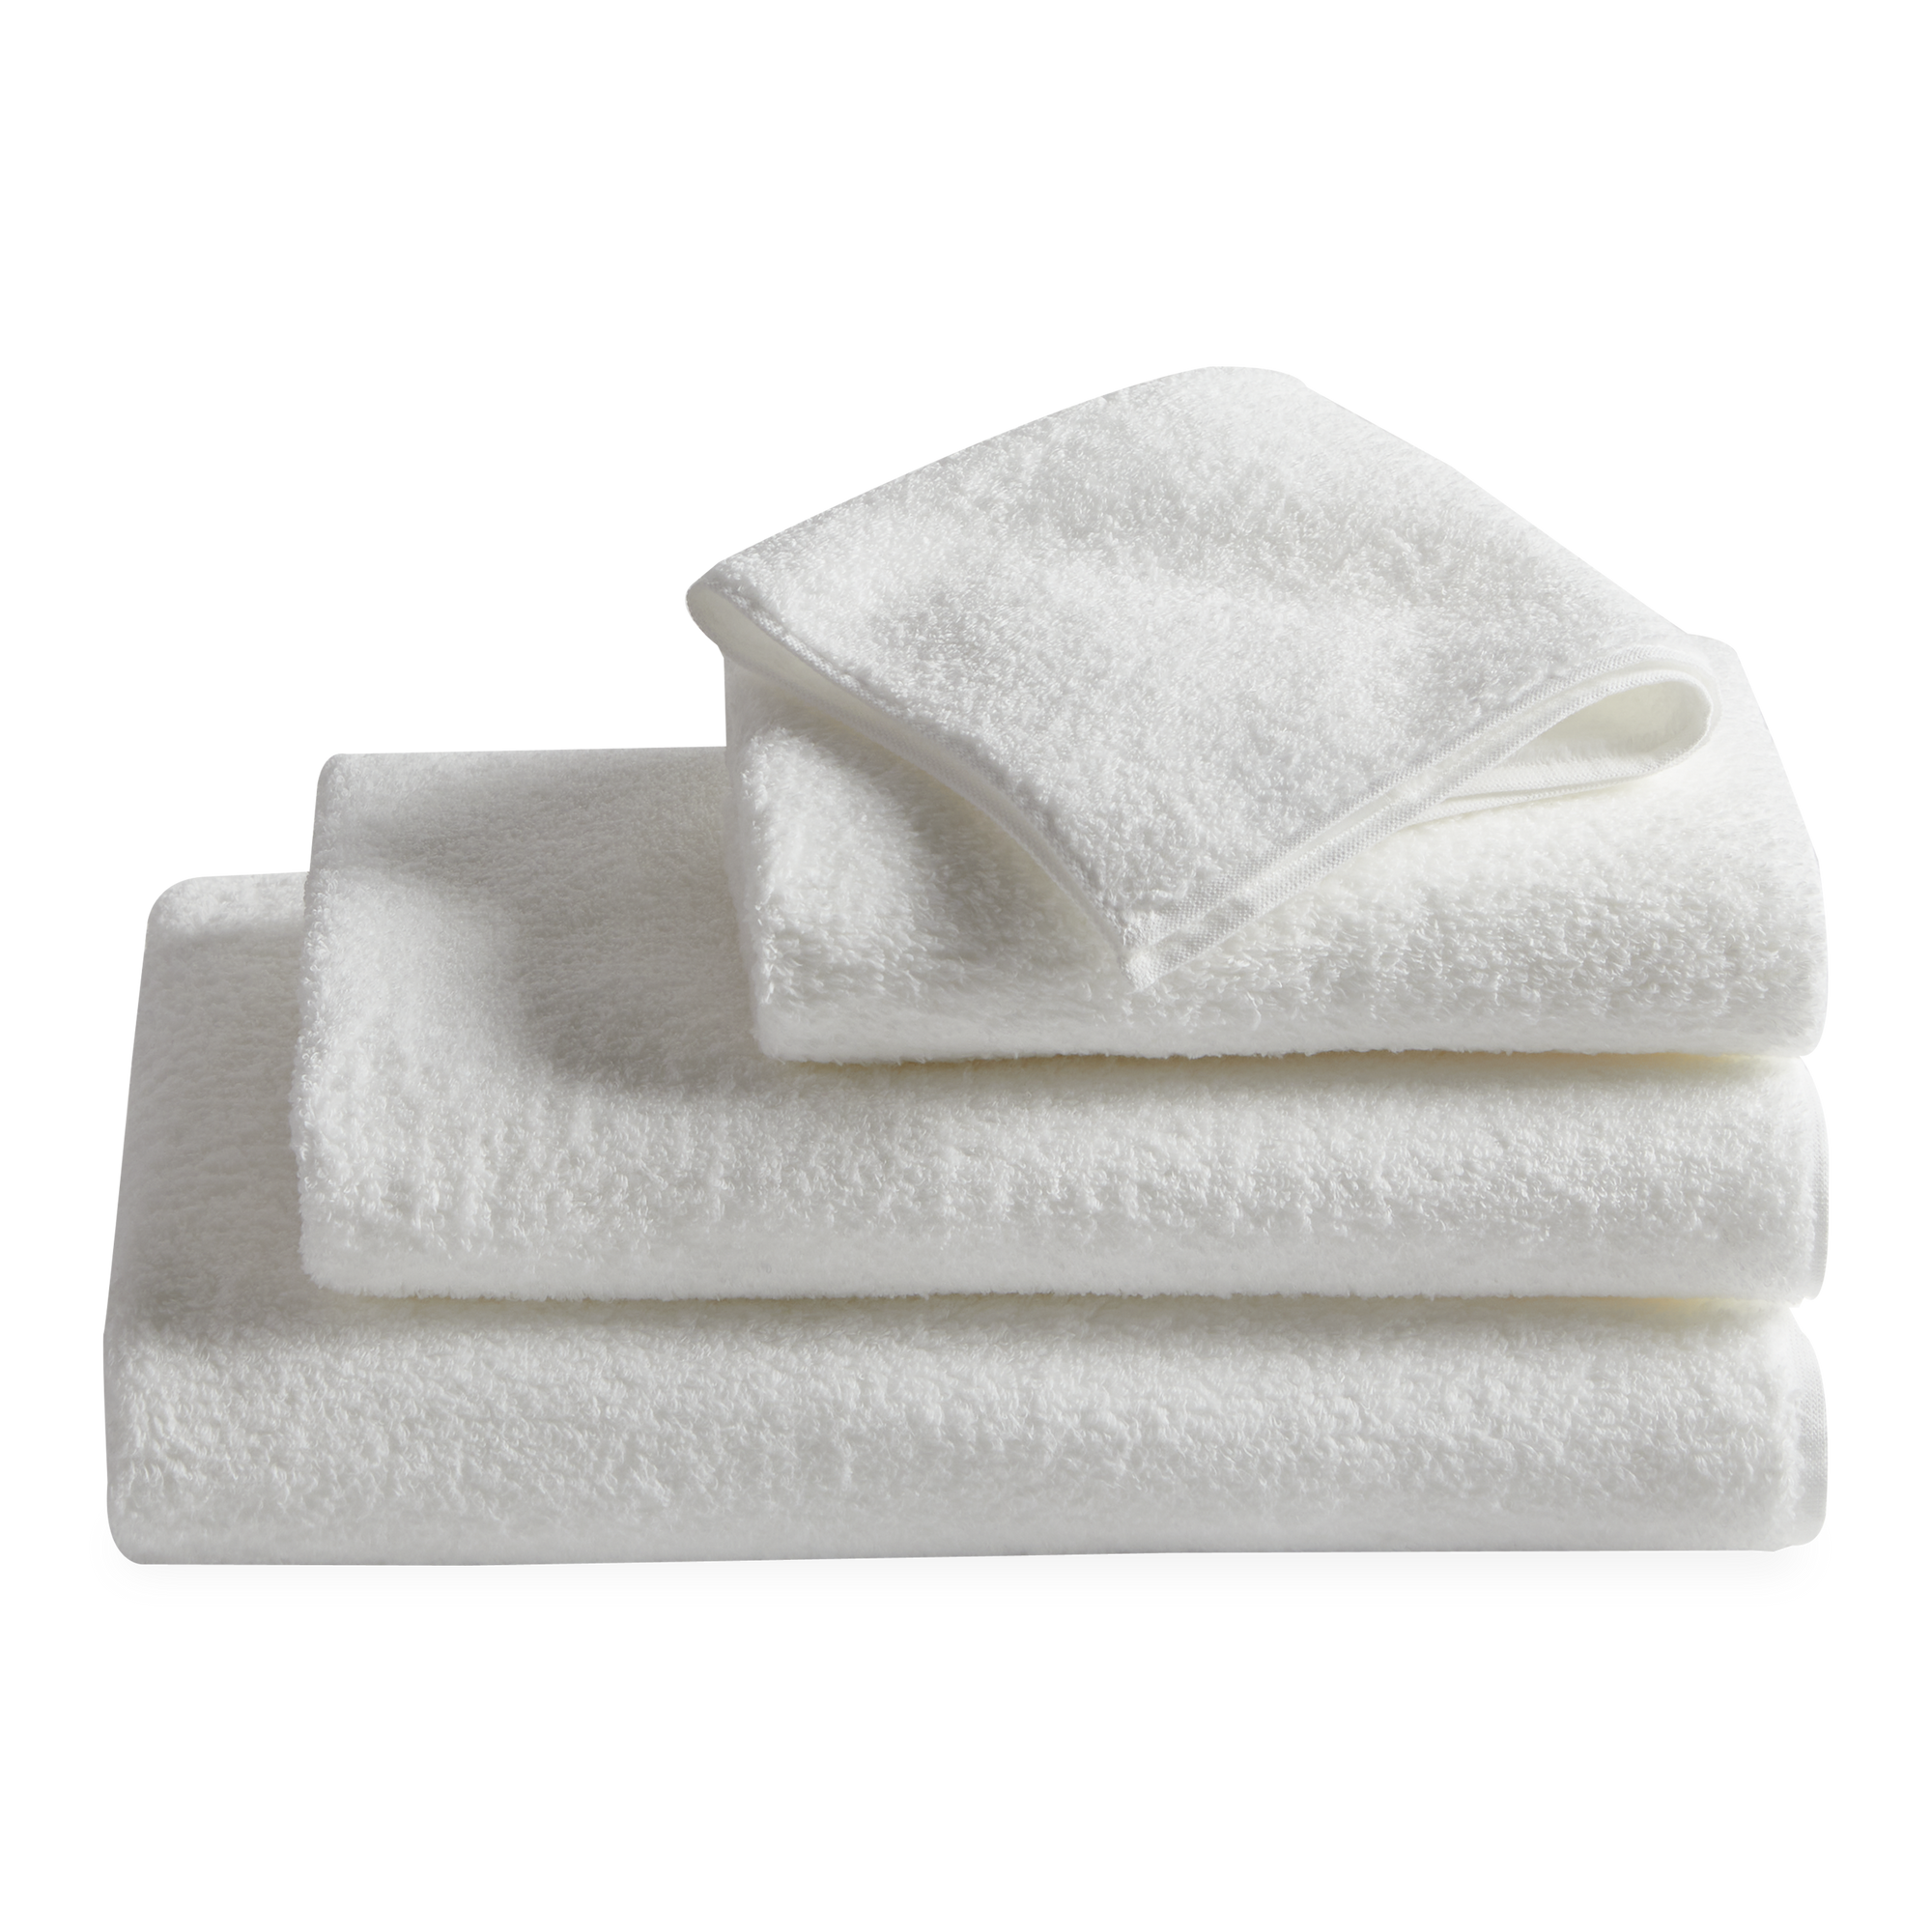 The Zero Twist towel collection is made of high quality organic cotton sourced to provide longer, thinner fiber and woven to create a luxurious fluffy texture.